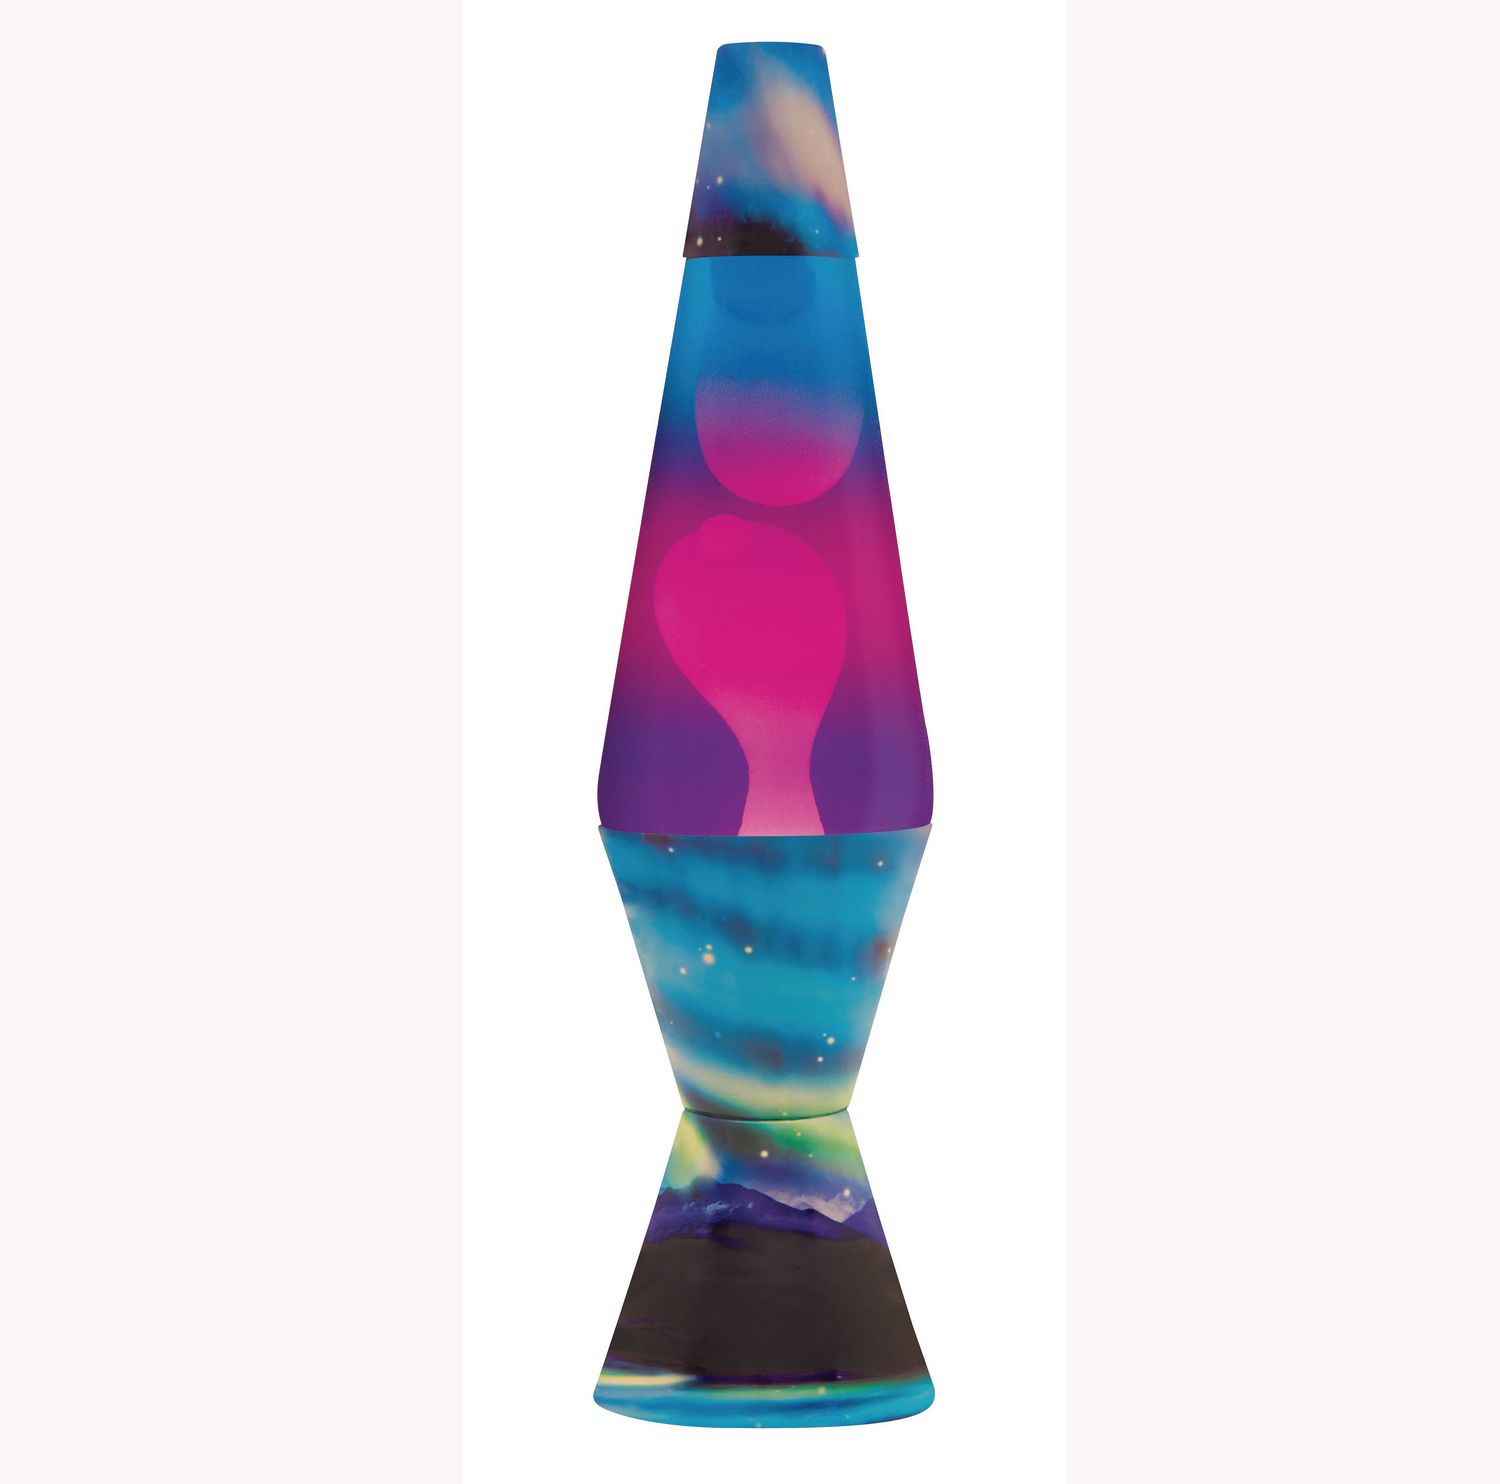 The Original Colormax Lava Lamp Northern Lights 4.0 x 4.0 x 14.5 Inches Galaxy 